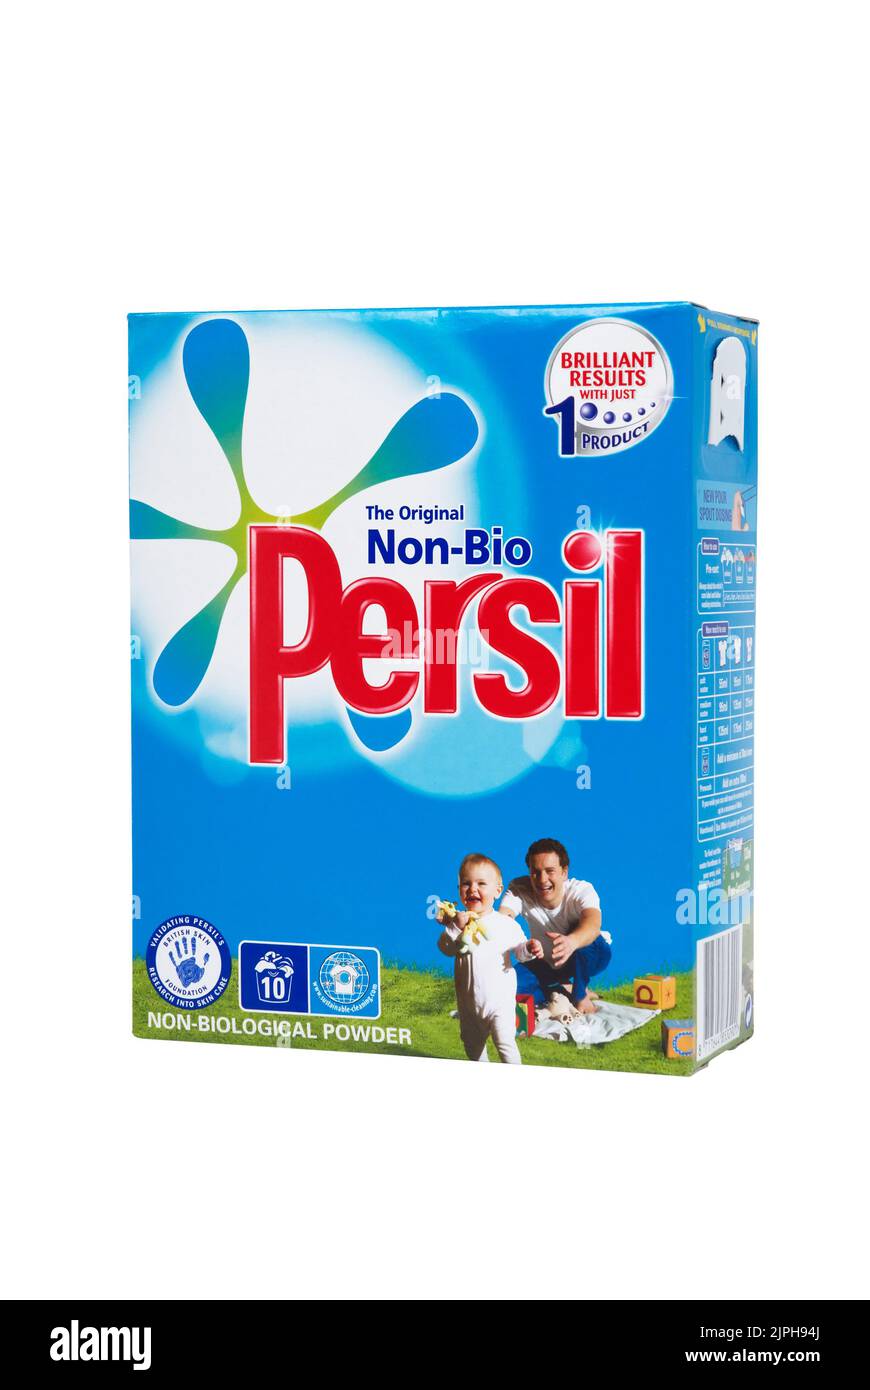 Box of Persil non-bio washing powder, studio shot on white background. Persil is a brand of laundry detergent Stock Photo